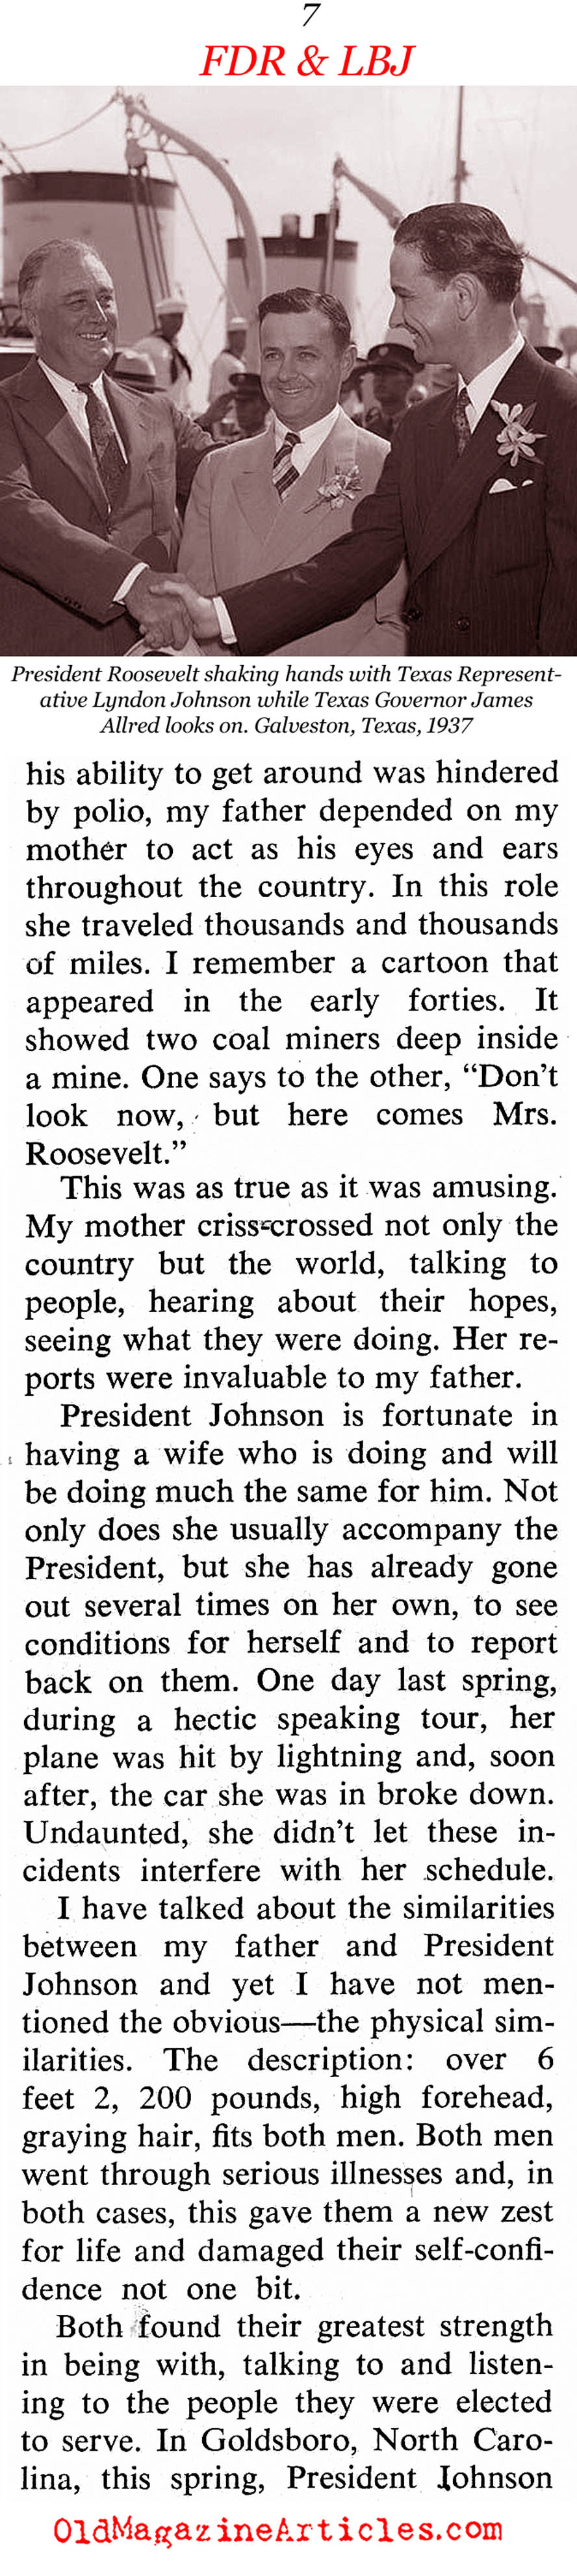 ''Why I Compare LBJ with my Father, FDR'' (Coronet Magazine, 1964)